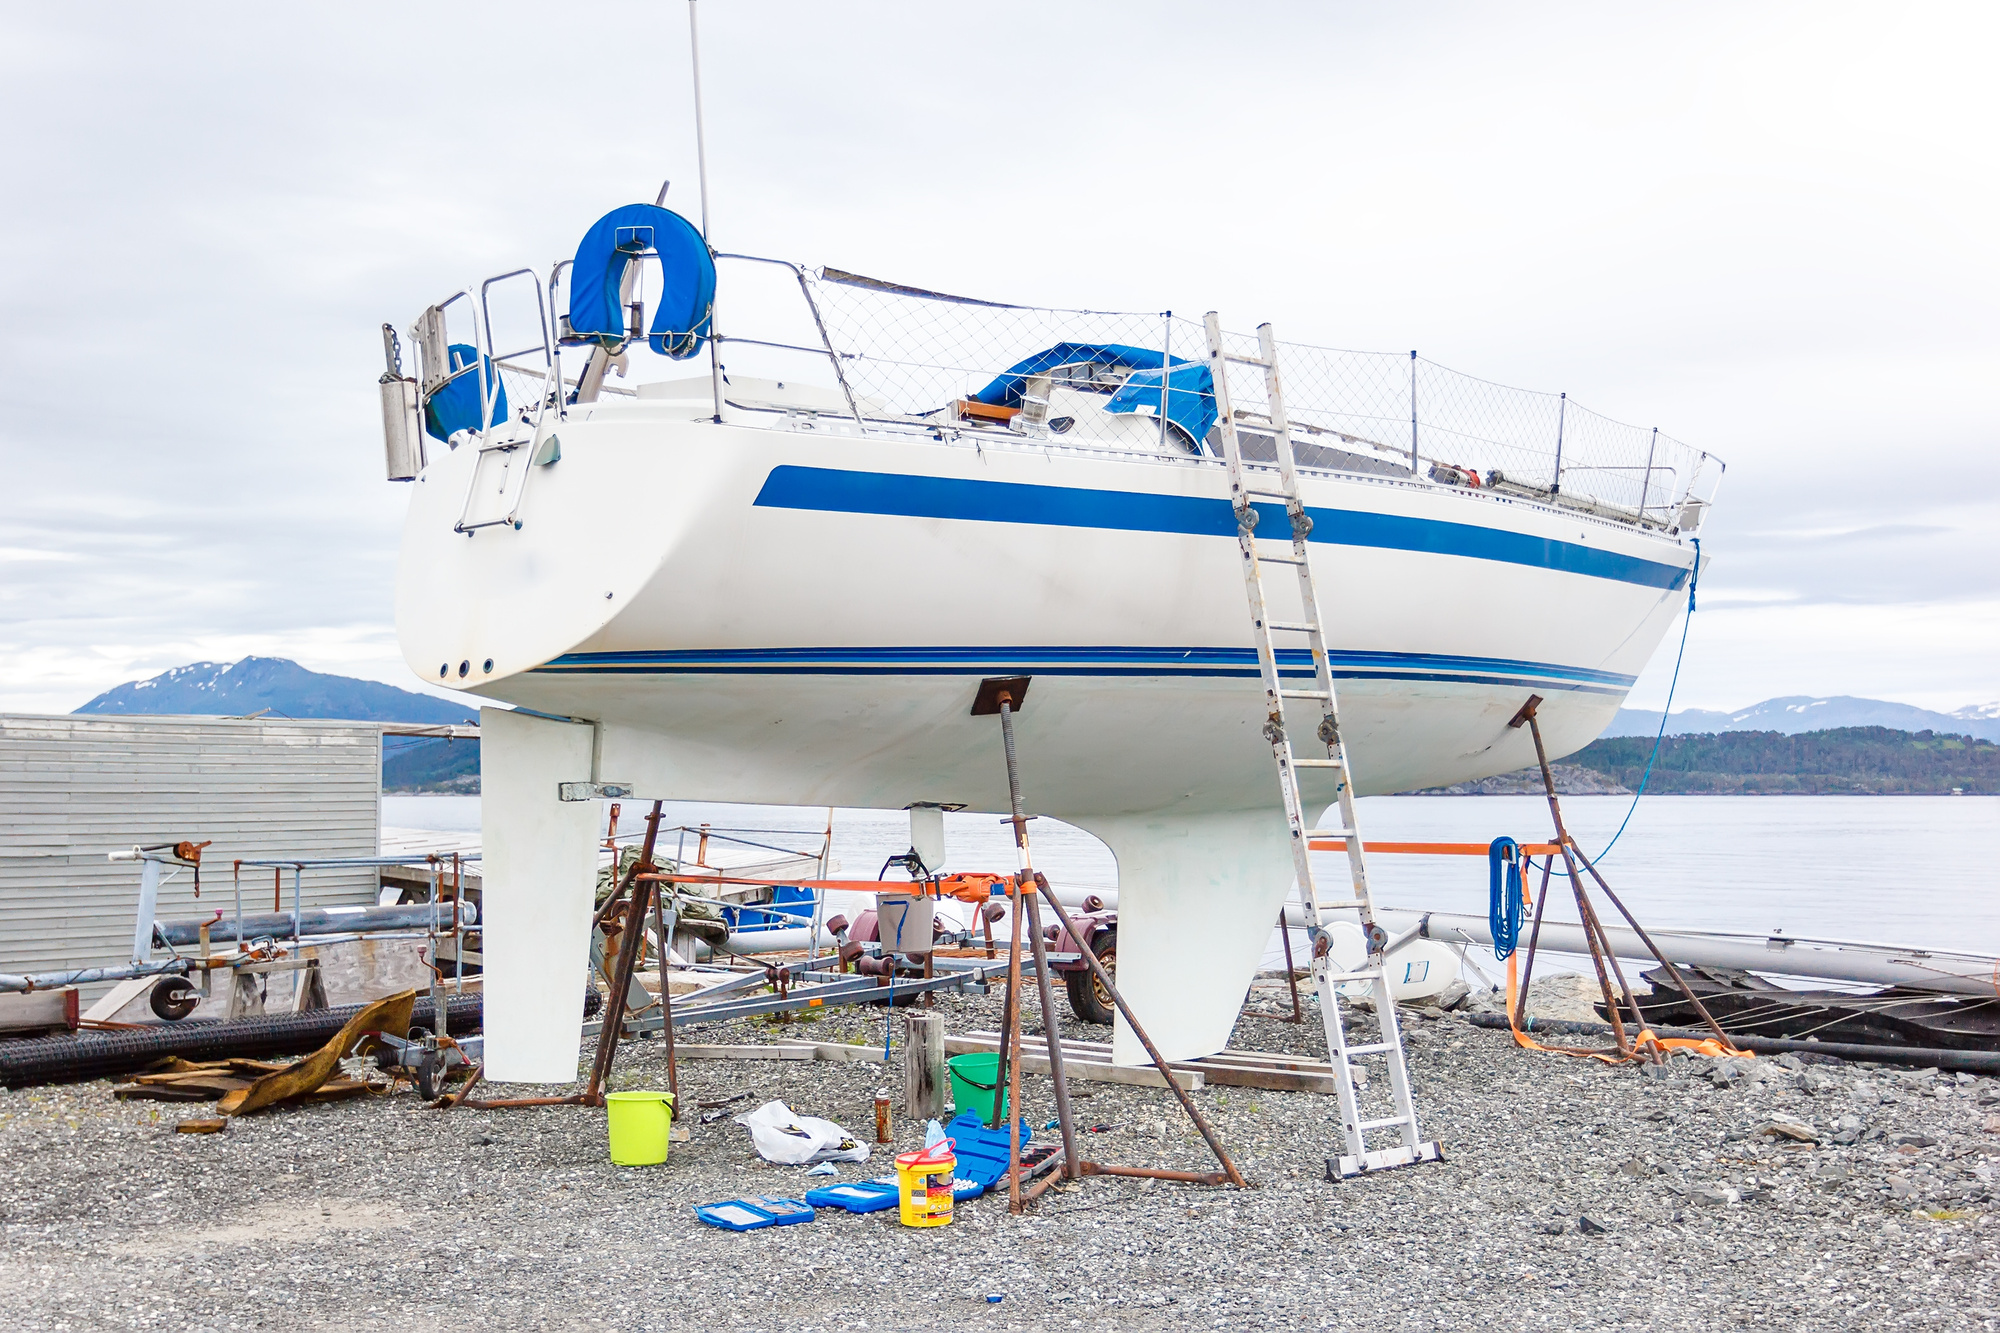 A Beginners Guide to Easy Fiberglass Boat Repair - Fiberglass Boat Repair